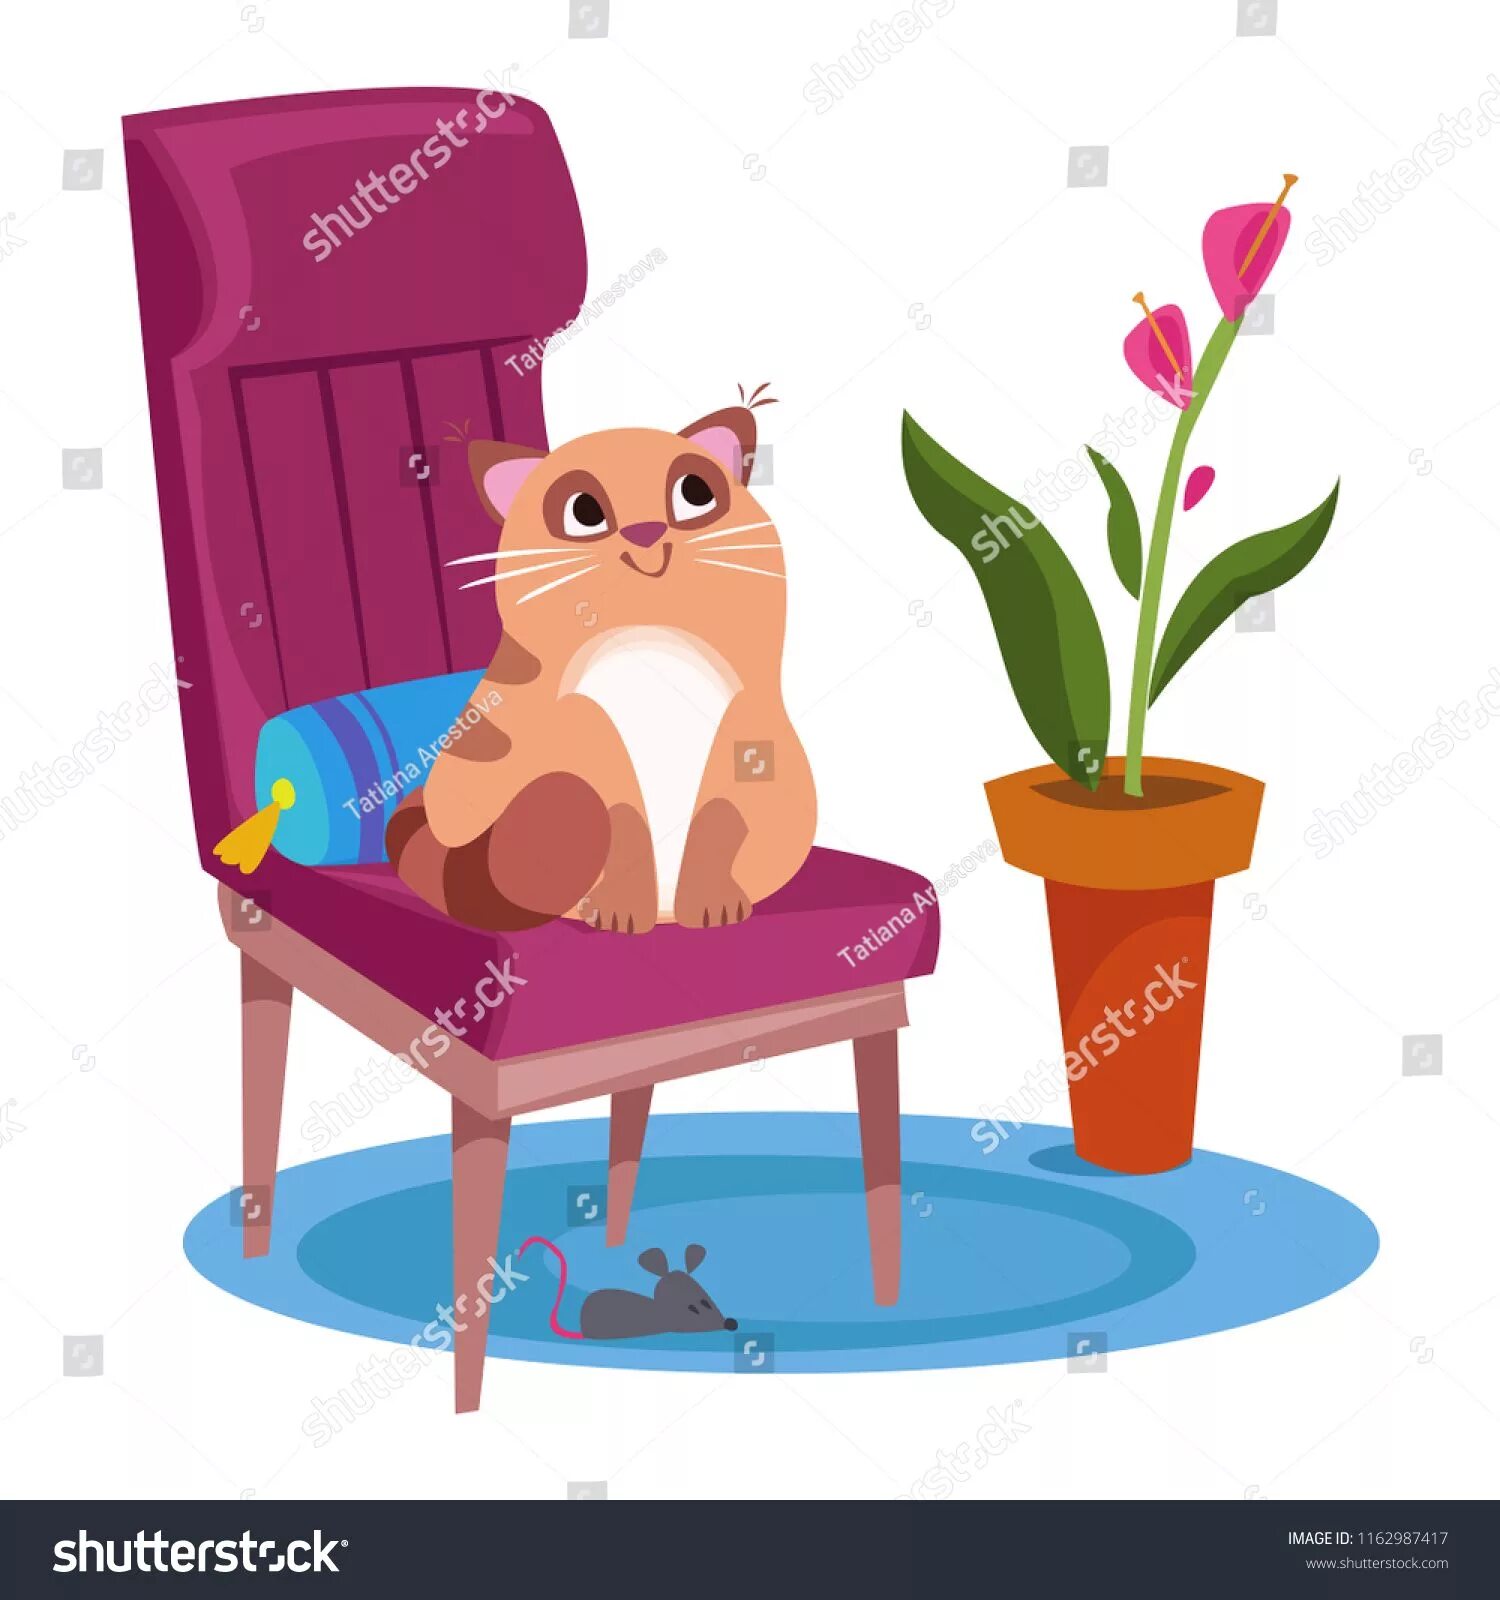 The cat is the chair. Cat under the Chair. Картинка Cat on the Chair картинки. The Cat is on the Chair the Mouse under the. Cat is in the Chair.